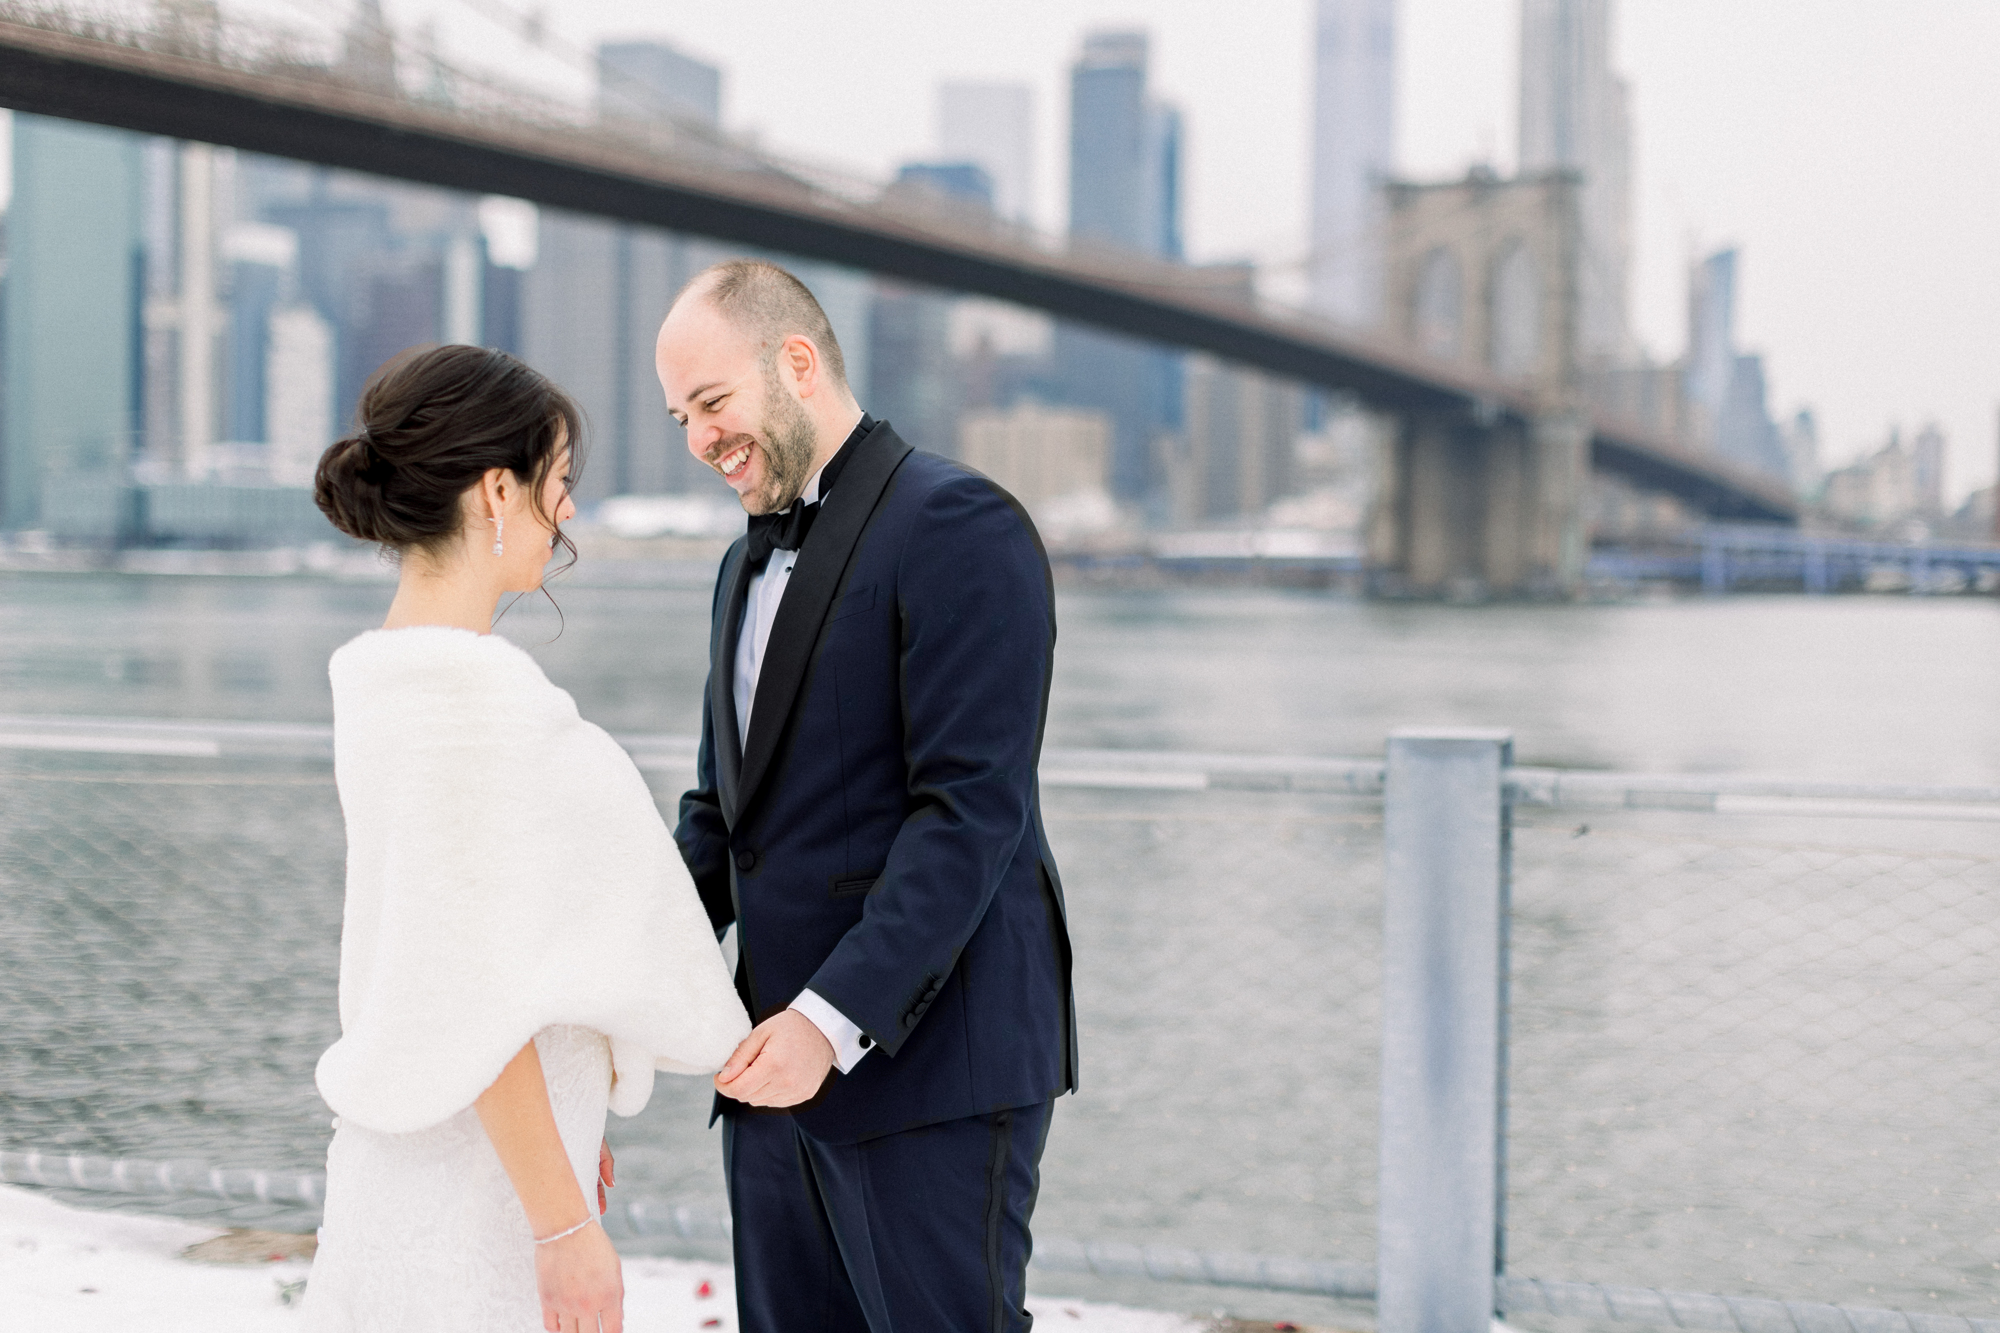 Dumbo wedding photos after the first look